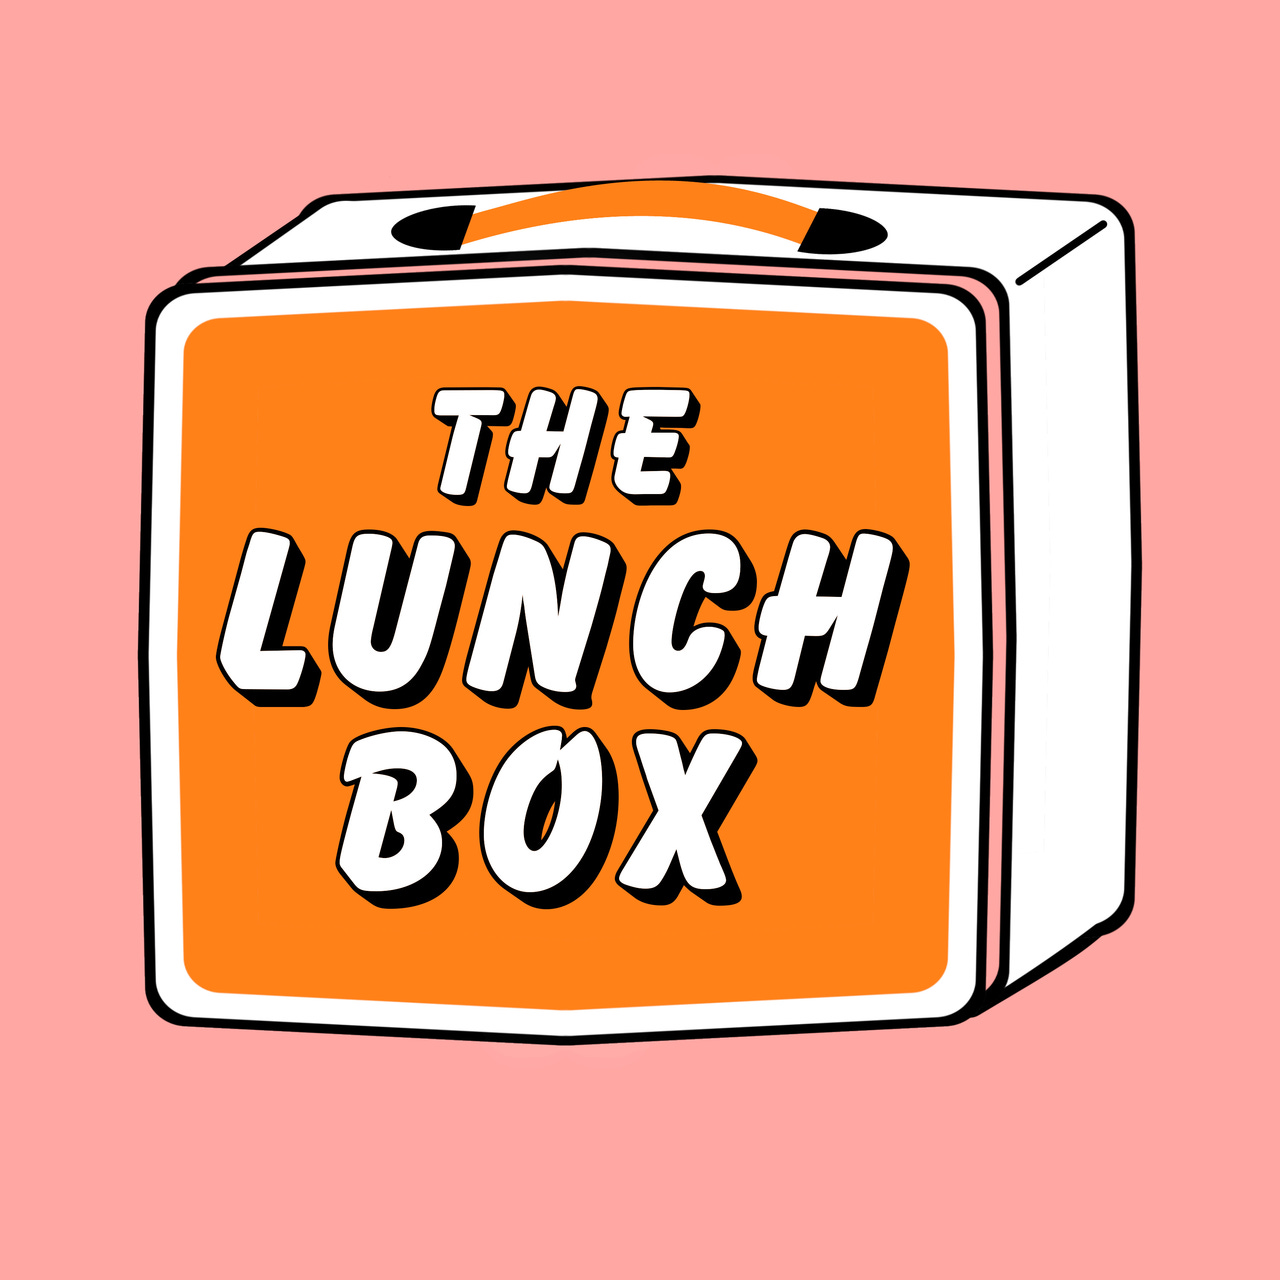 Artwork for The Lunchbox